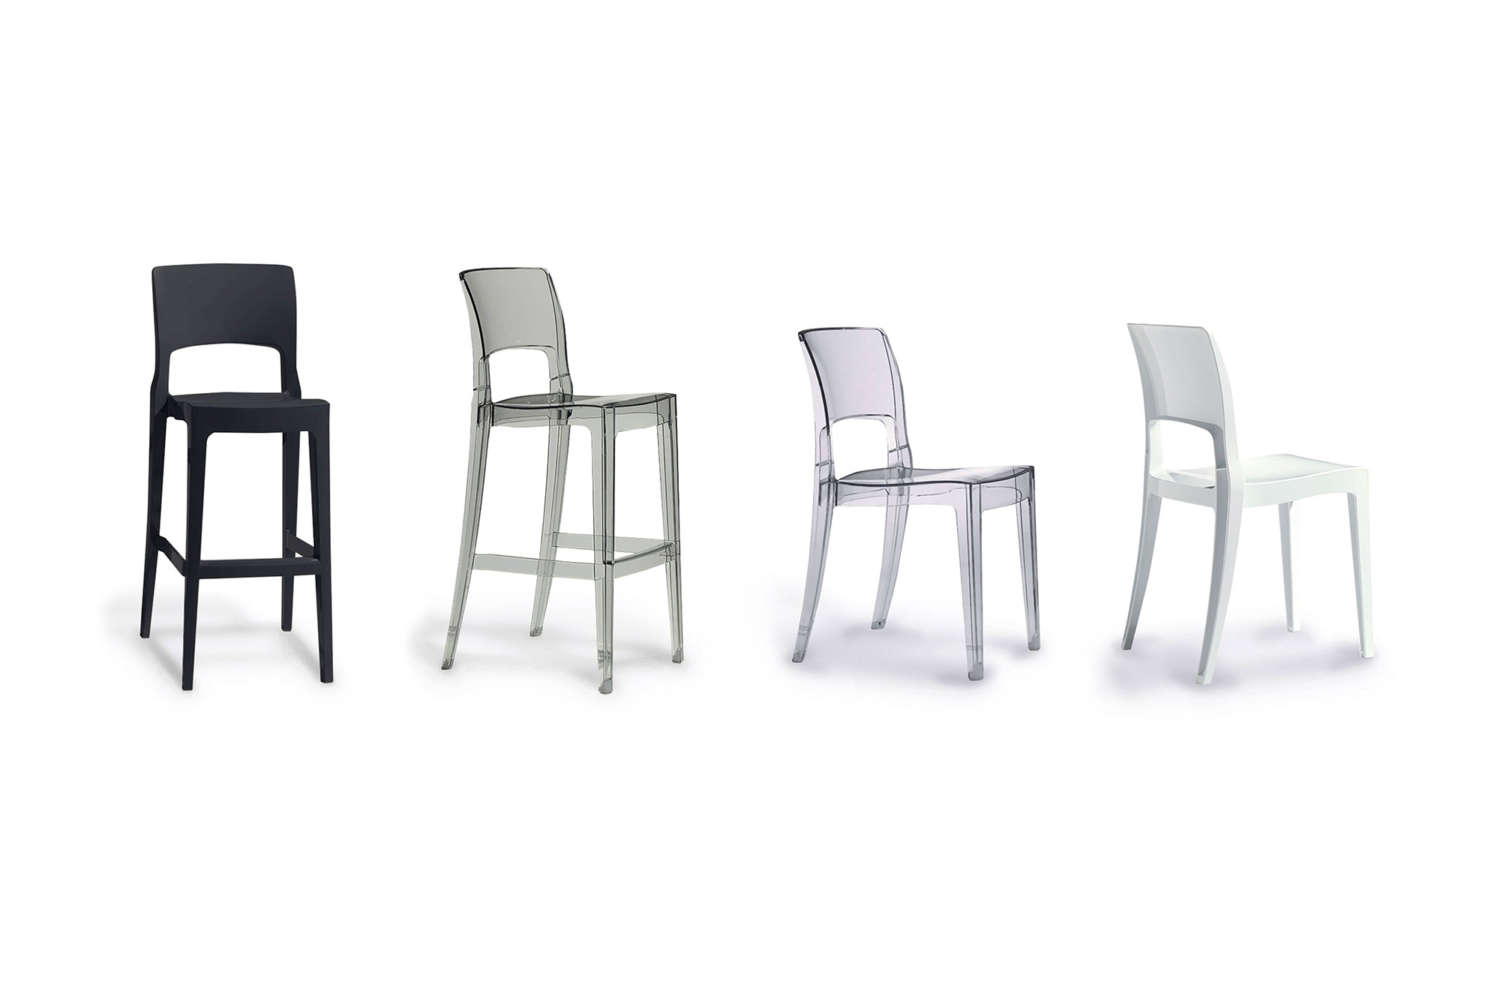 Commercial plastic chairs for offices and cafe's